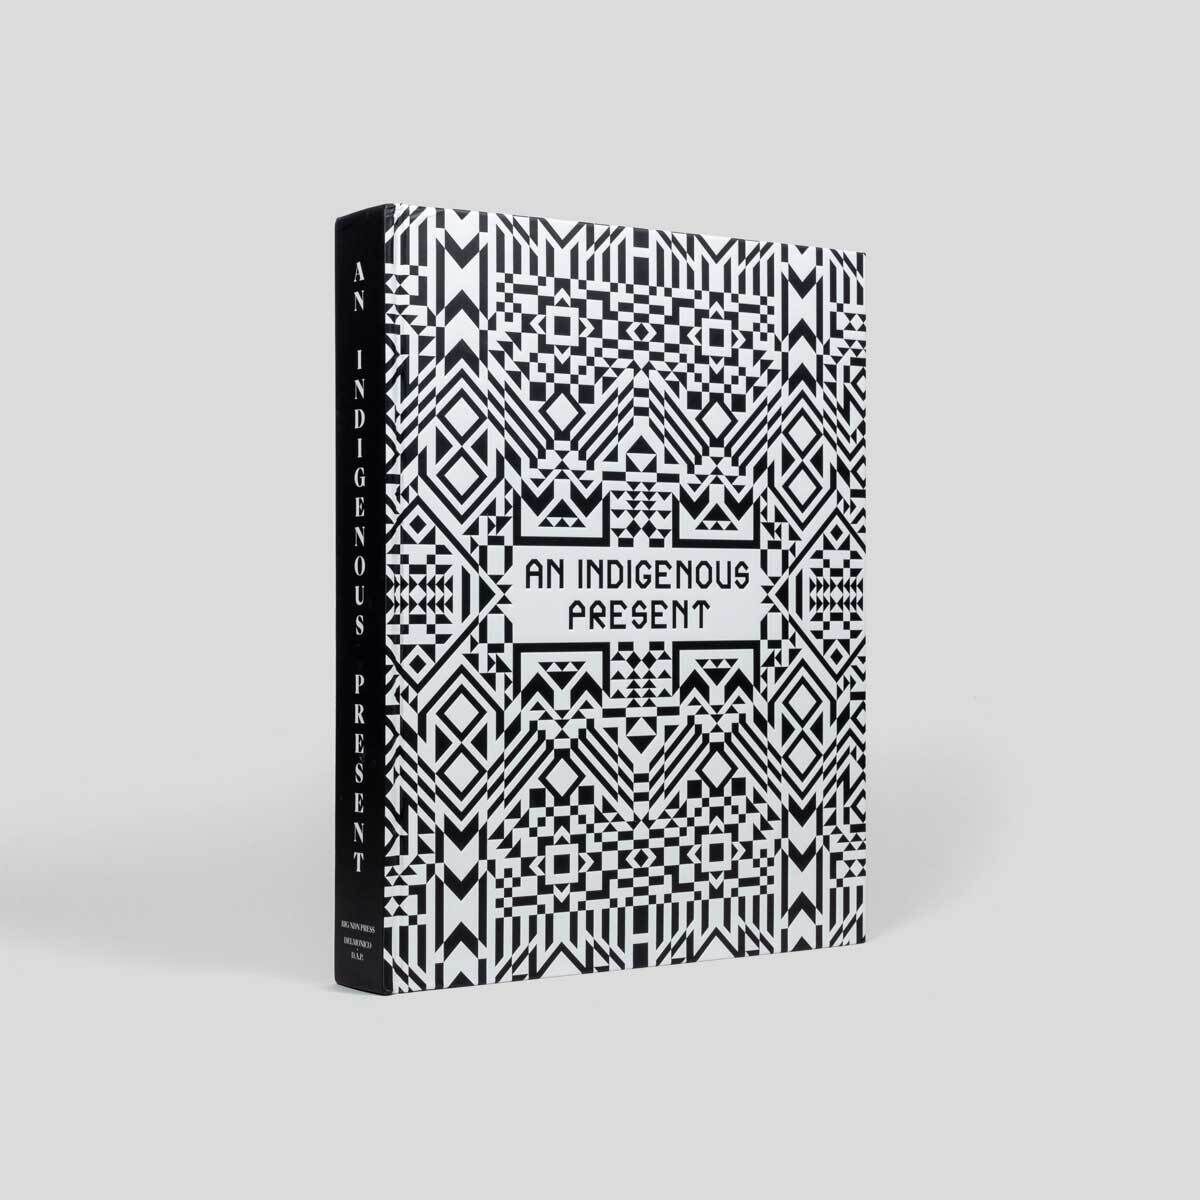 A book with a black and white geometric patterned cover titled "An Indigenous Present" on a white background.